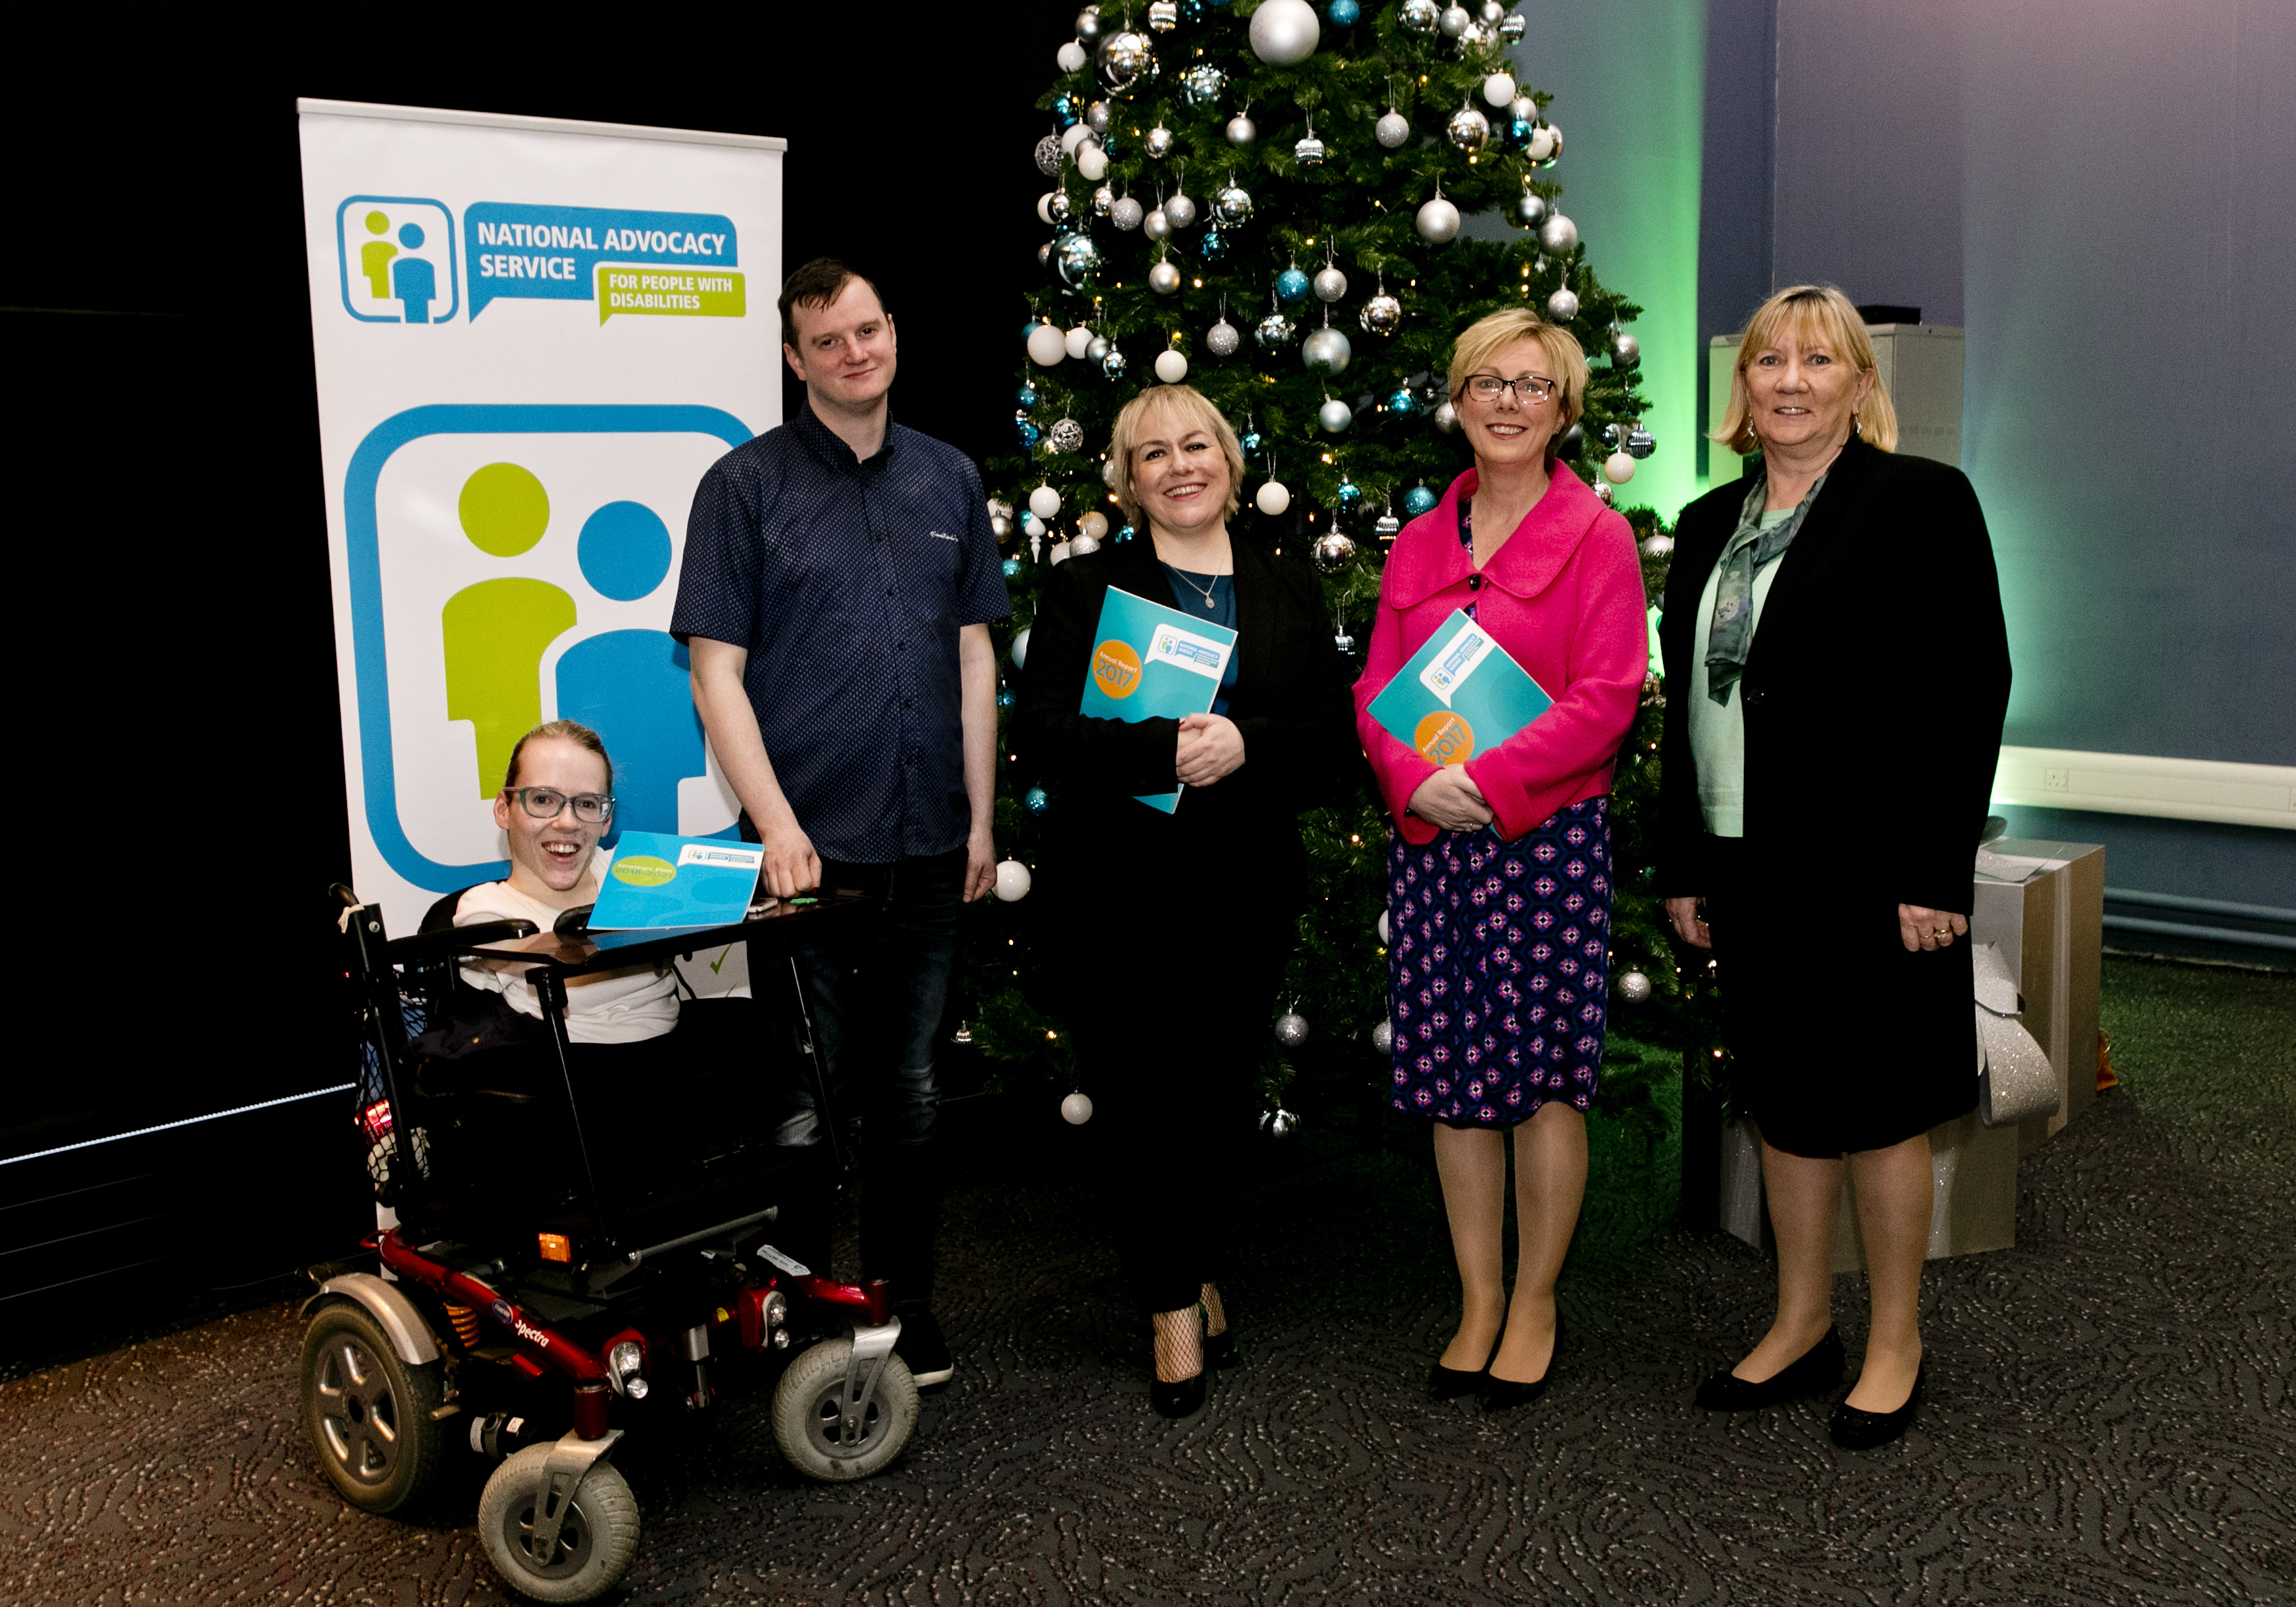 Pictured at the launch were from left: Joanne O’Riordan, Journalist and Disability Rights Activist, PJ Harrington, former NAS client, Louise Loughlin, NAS National Manager, Minister Regina Doherty and Angela Black, Chief Executive, CIB.